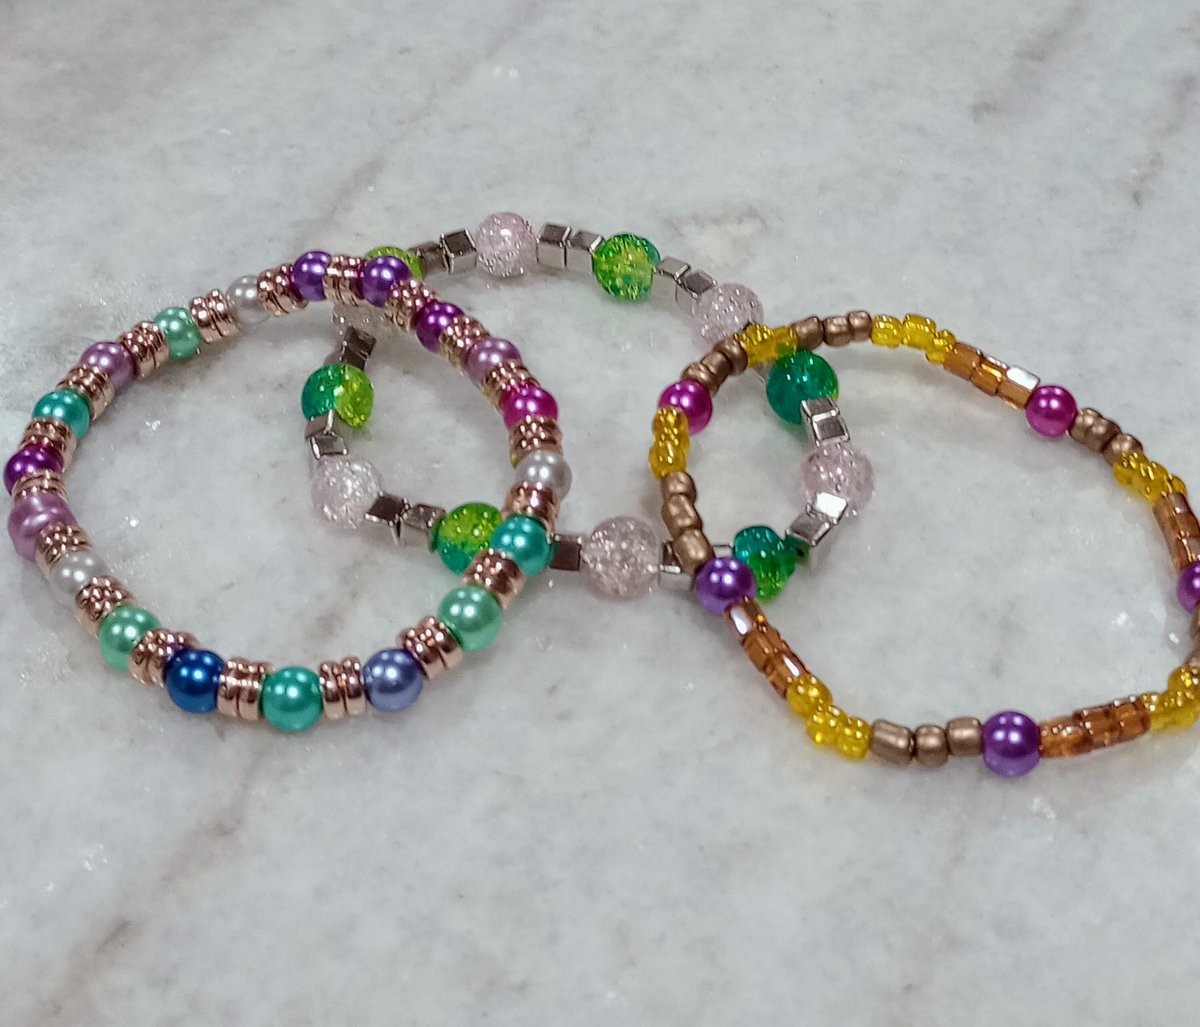 Tonight's beautiful bracelets! These will be going to the consignment shops!! Can't list them all ❤️

#bracelets #handmade #beads #stretchbracelets #JewelryMaking #cuteaccessories #colorful #multicolorjewelry #giftideas